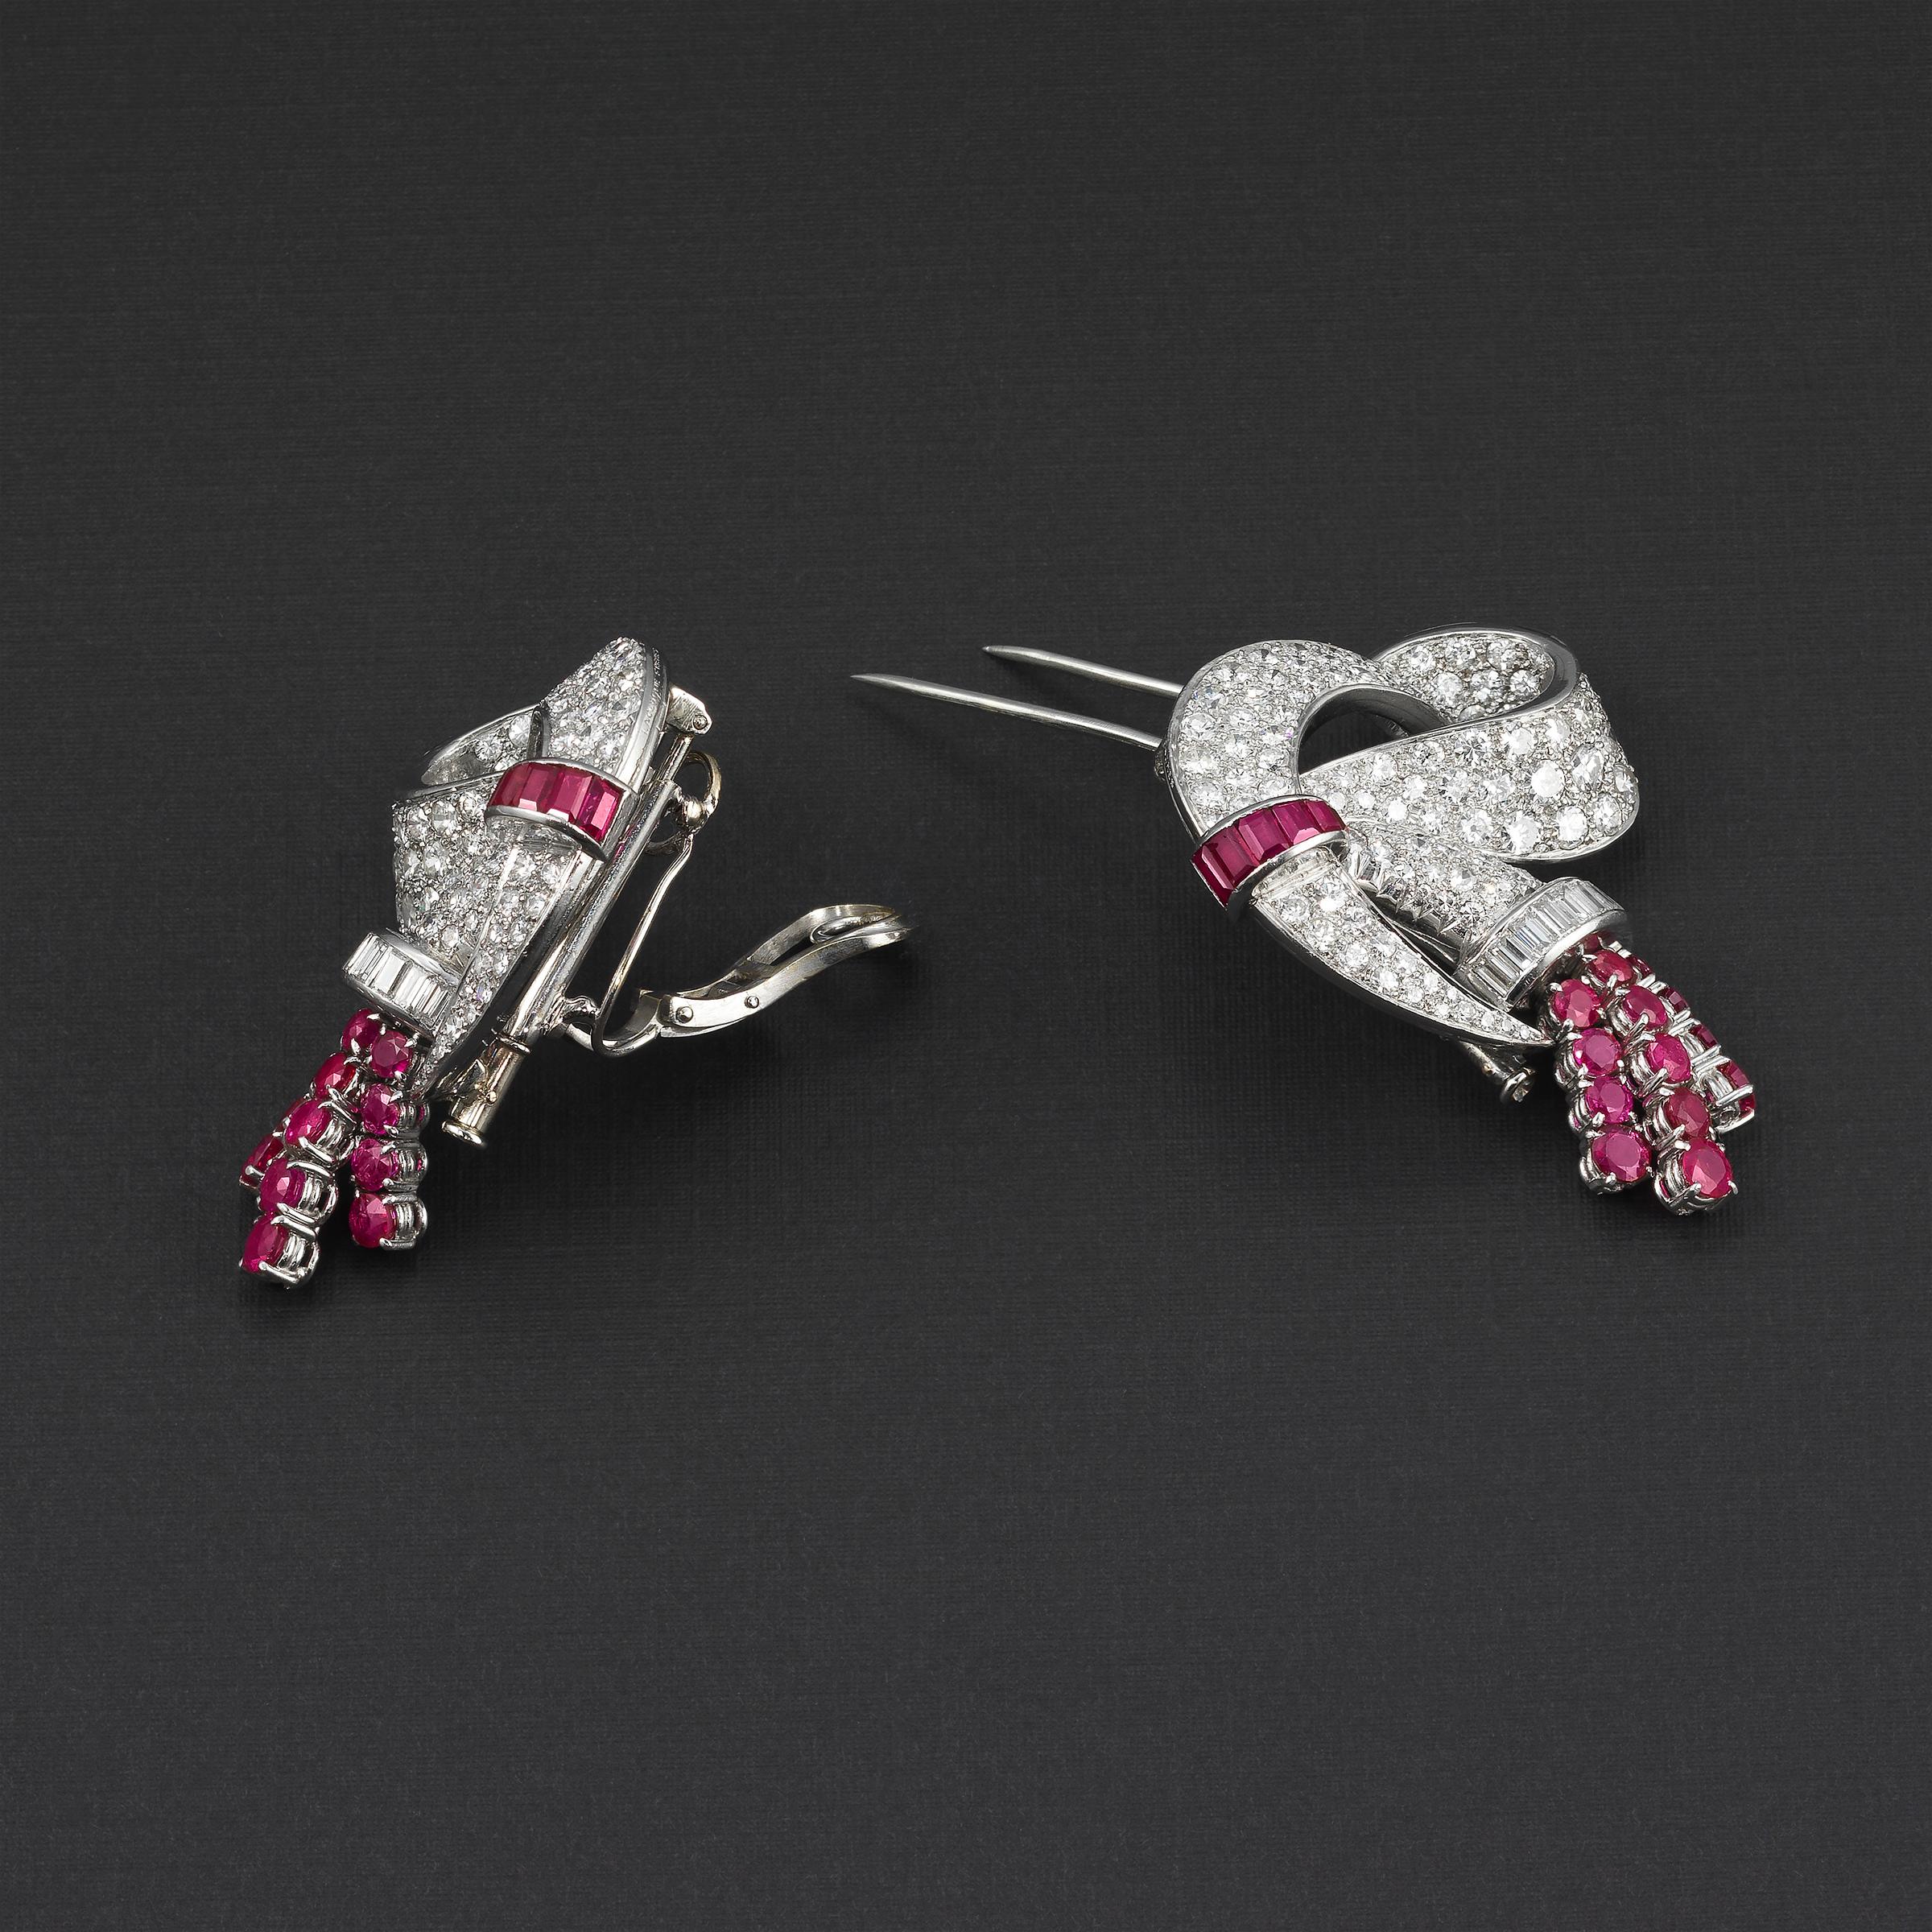 Mixed Cut Lacloche Frères Important Art Deco Burma Ruby Diamond Earrings and Clip Brooches For Sale